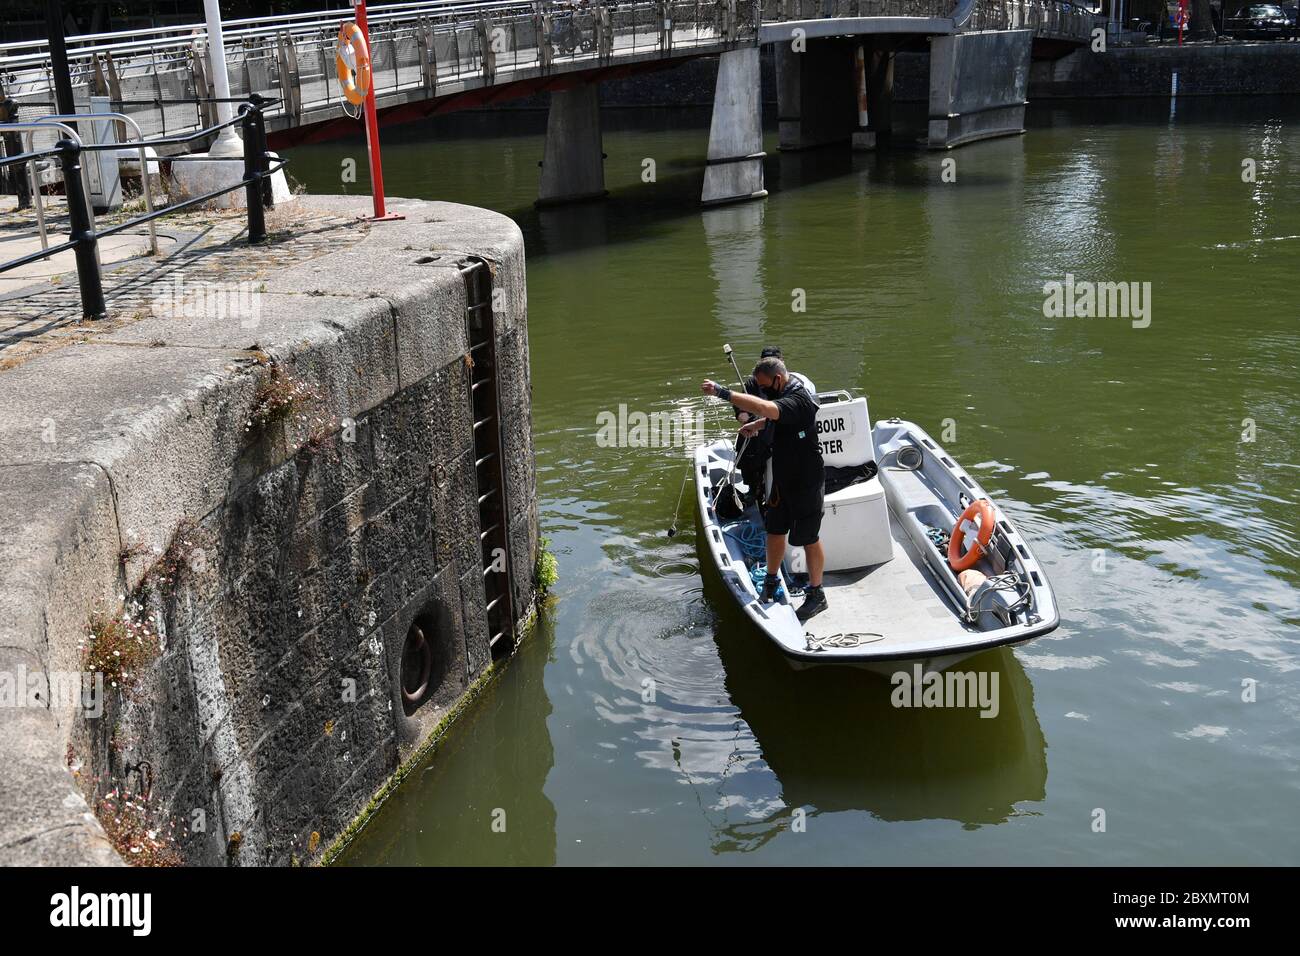 The Harbour Master checks the depth of the area of water where the statue of Edward Colston was dumped during a Black Lives Matter protest on Sunday to make sure its not a navigational hazard. The protests were sparked by the death of George Floyd, who was killed on May 25 while in police custody in the US city of Minneapolis. Stock Photo